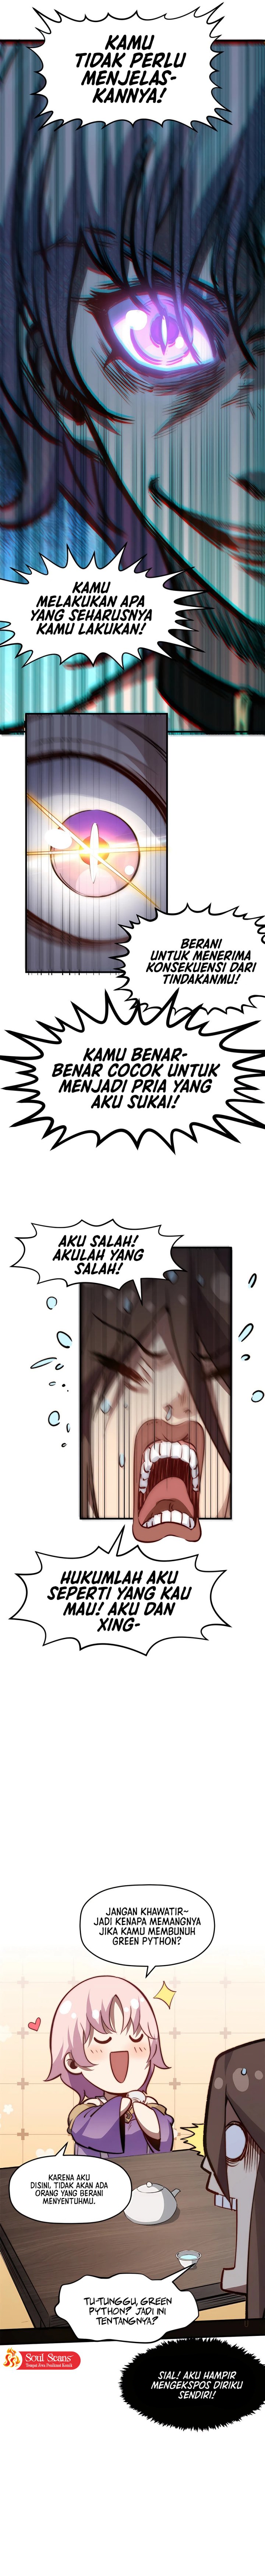 Dilarang COPAS - situs resmi www.mangacanblog.com - Komik top tier providence secretly cultivate for a thousand years 115 - chapter 115 116 Indonesia top tier providence secretly cultivate for a thousand years 115 - chapter 115 Terbaru 13|Baca Manga Komik Indonesia|Mangacan